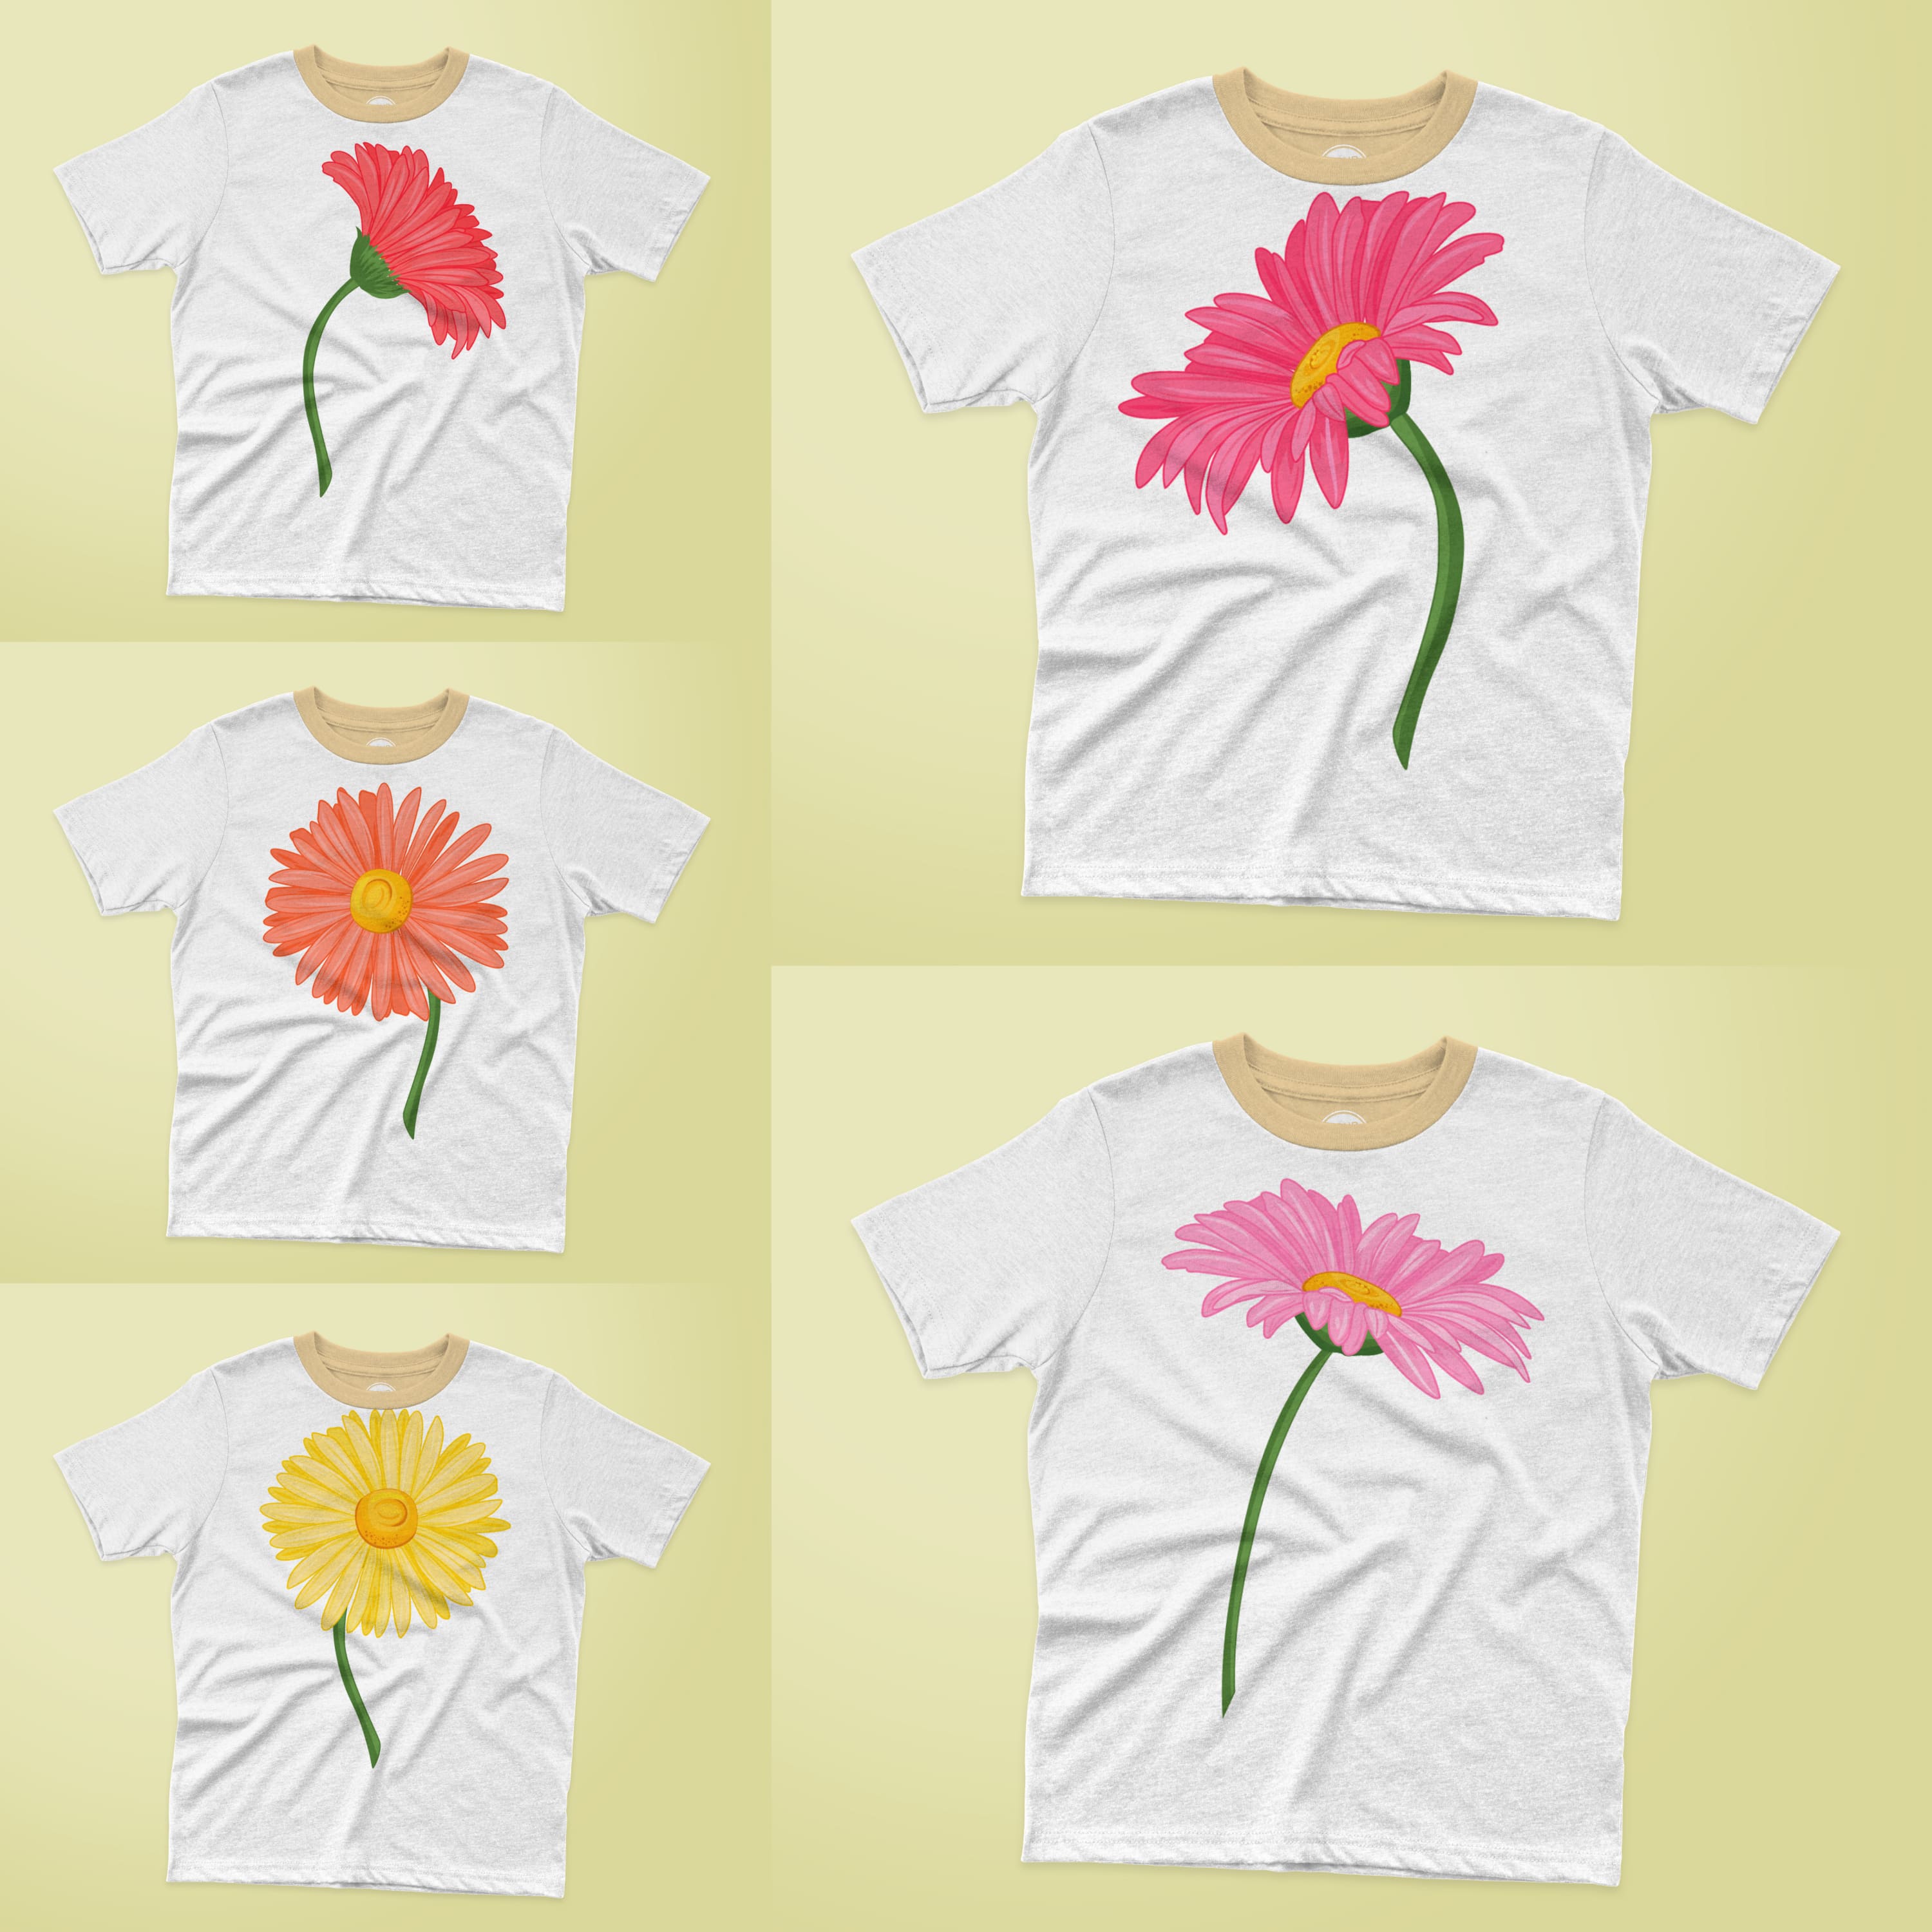 There are so many flowers designs with t-shirts.